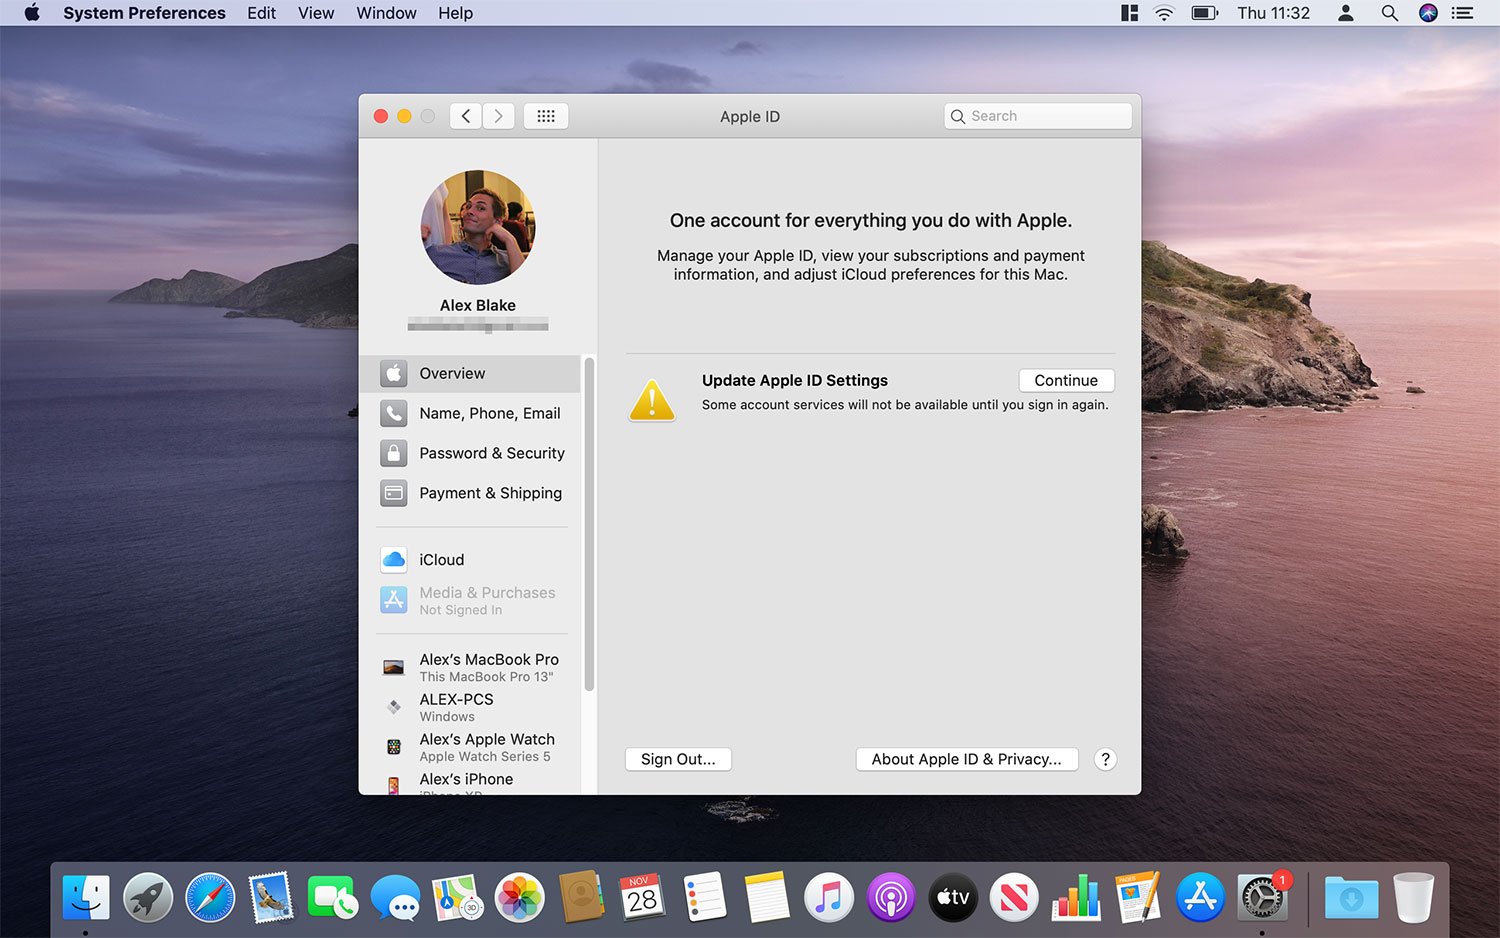  How to fix the Update Apple ID Settings bug in MacOS Catalina